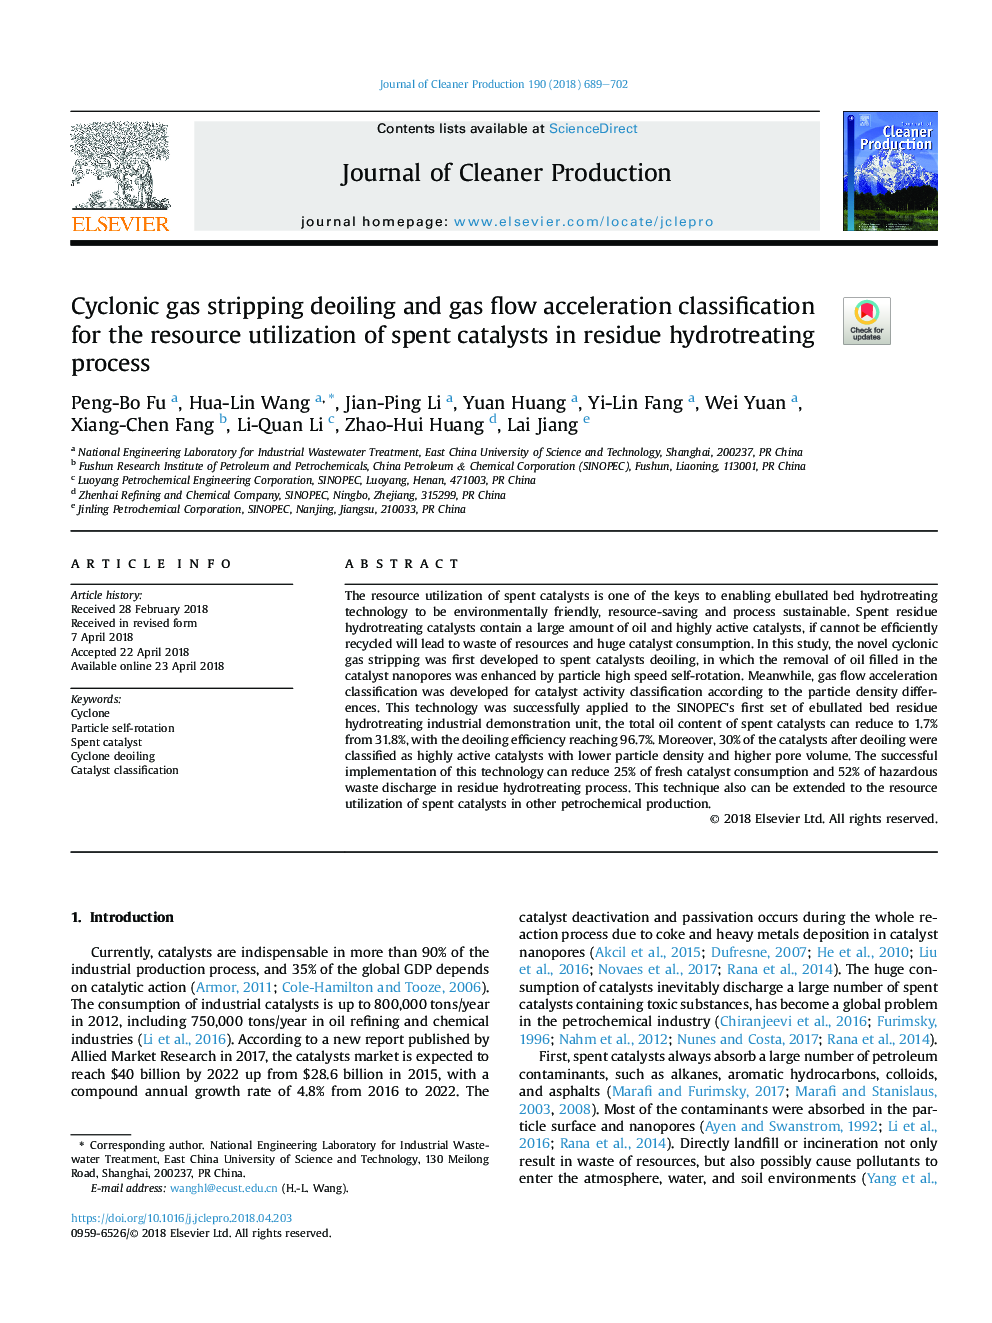 Cyclonic gas stripping deoiling and gas flow acceleration classification for the resource utilization of spent catalysts in residue hydrotreating process